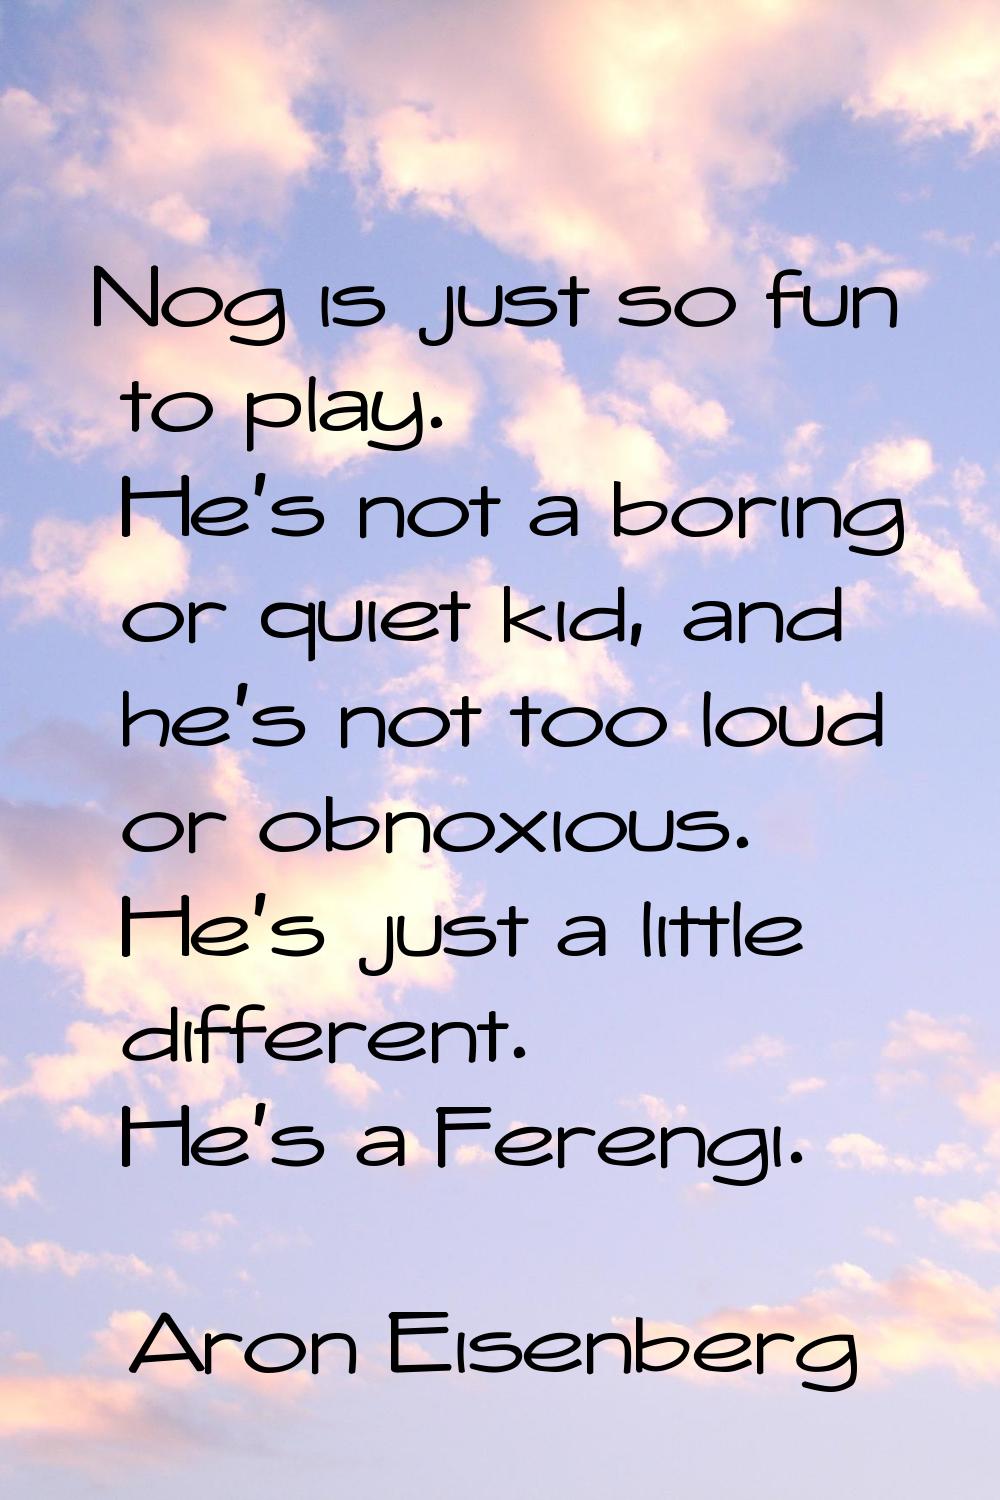 Nog is just so fun to play. He's not a boring or quiet kid, and he's not too loud or obnoxious. He'